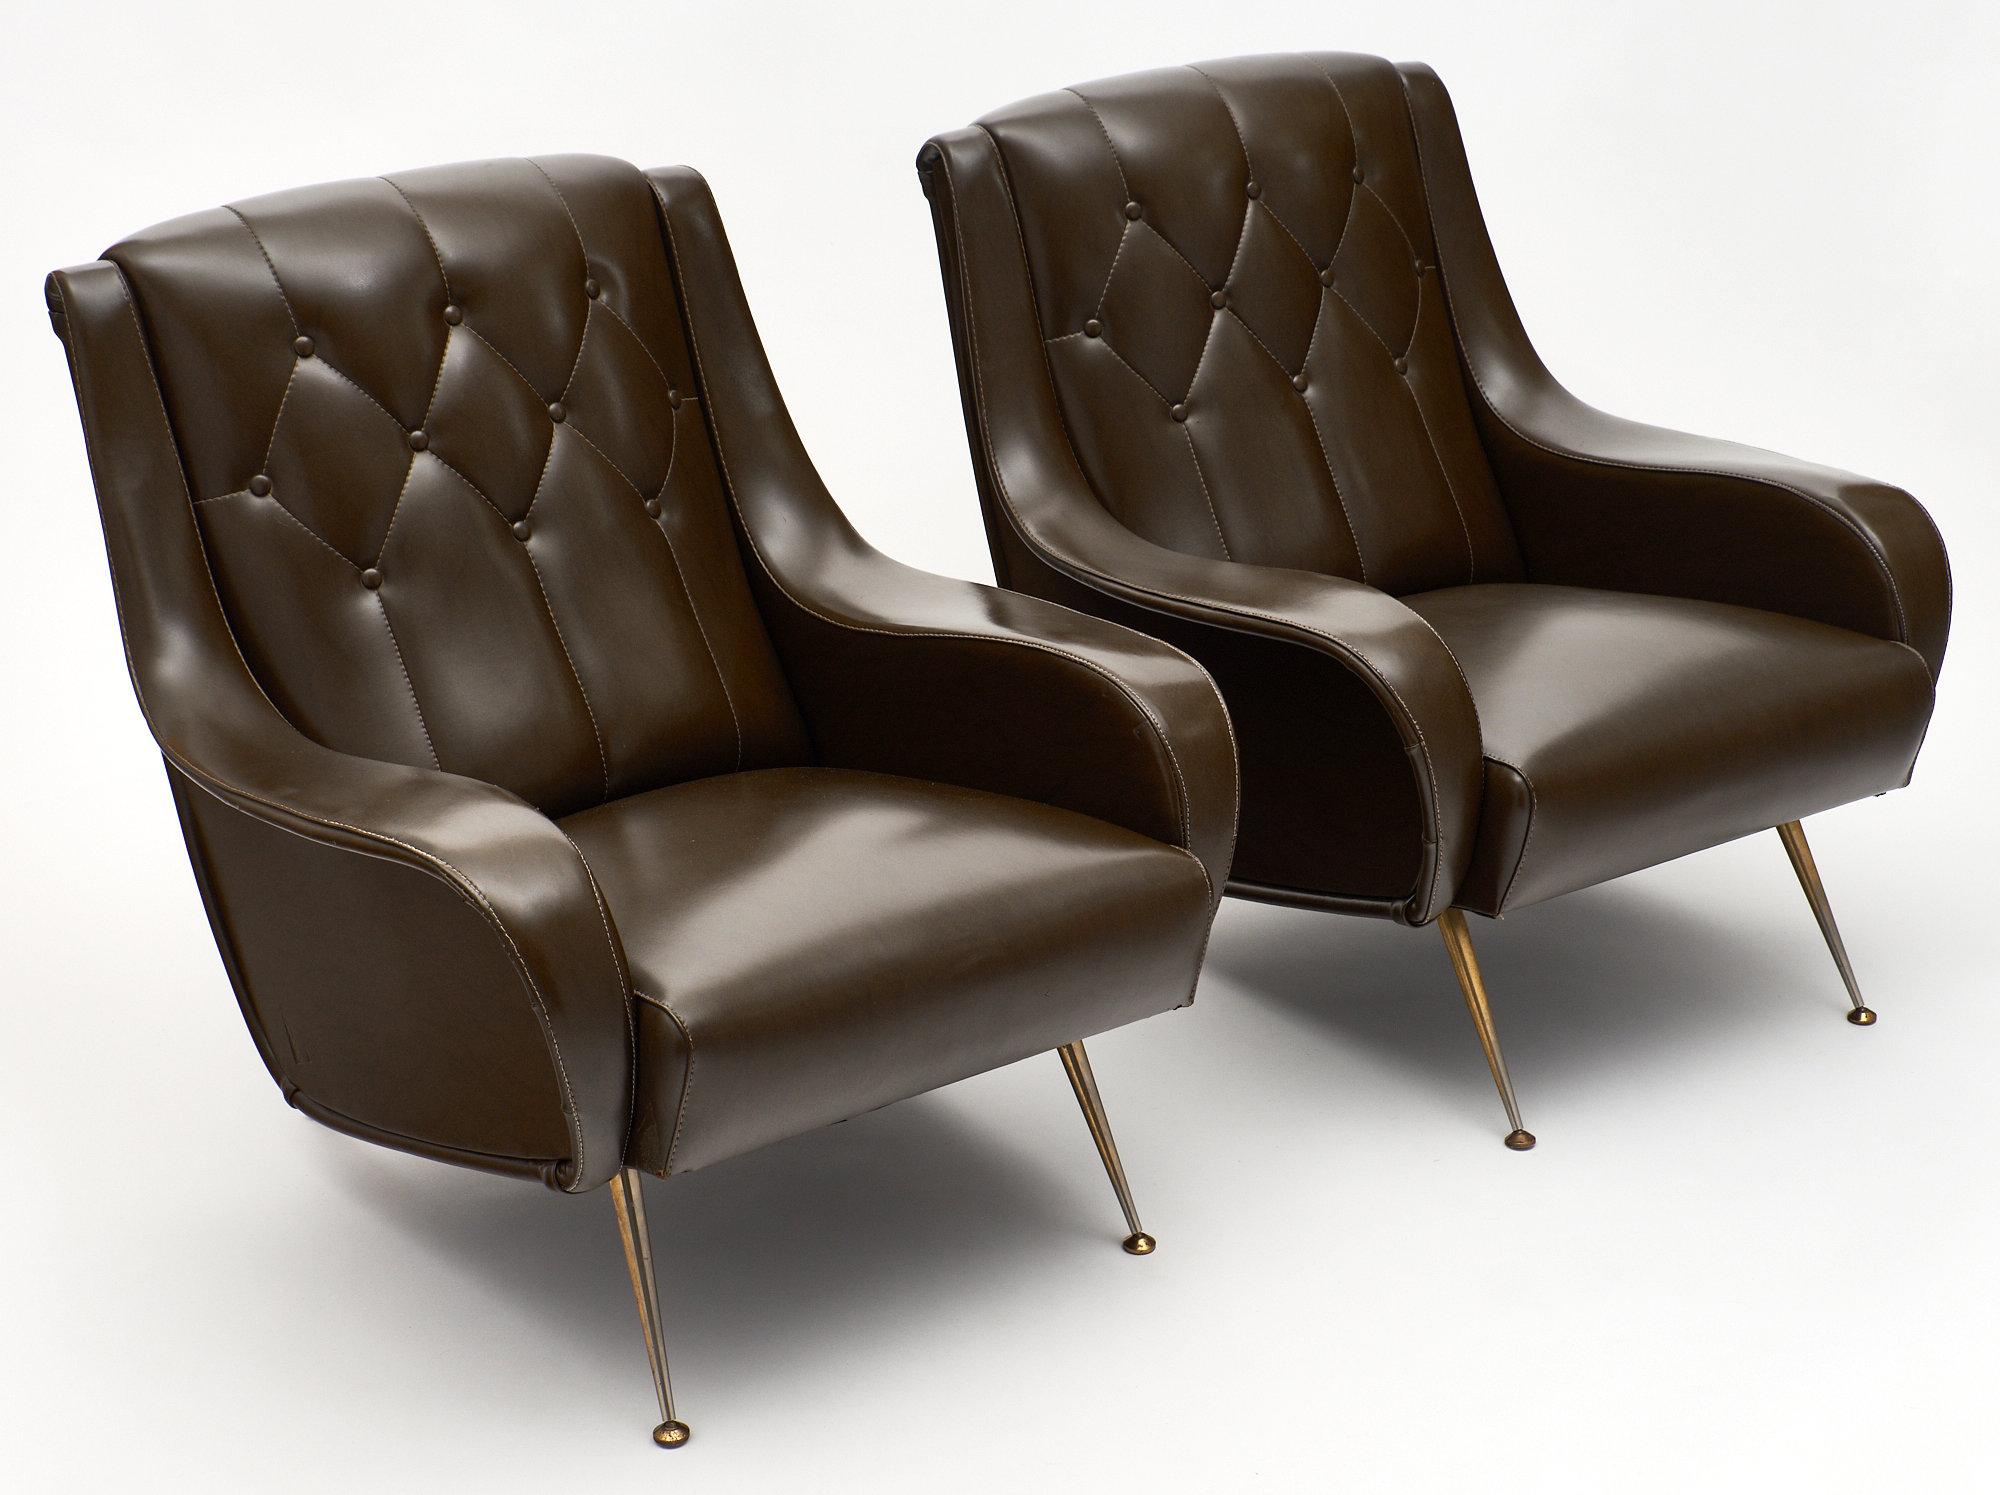 Modernist French vintage armchairs. A pair of comfortable armchairs with their original vinyl upholstery, tufted and in very good condition. We loved the dynamic lines and the original solid brass feet. This pair is very comfortable!